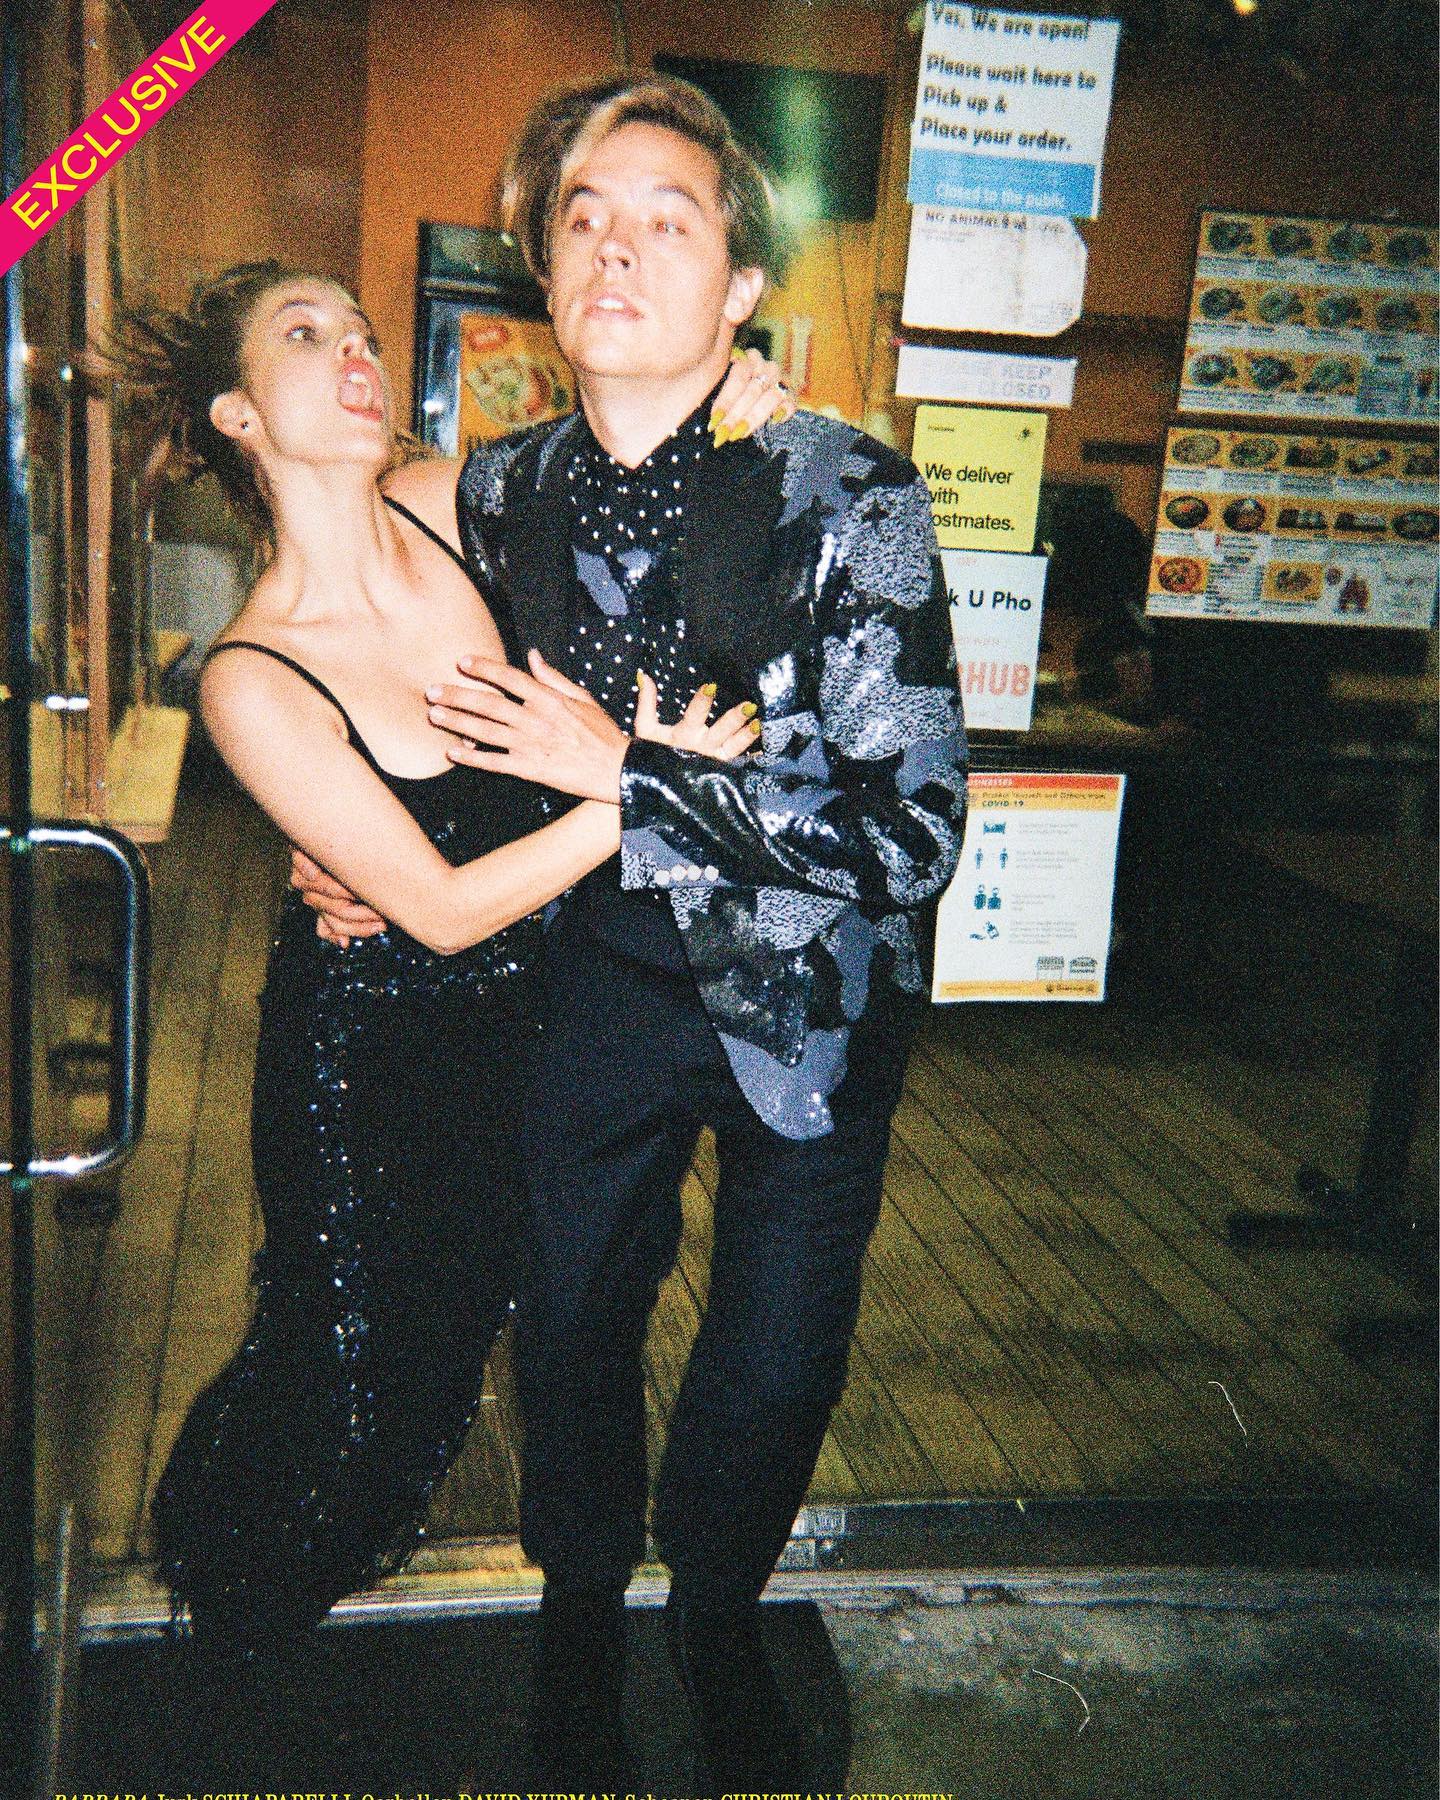 Fotos n°4 : Barbara Palvin y Dylan Sprouse Hit the Cover!